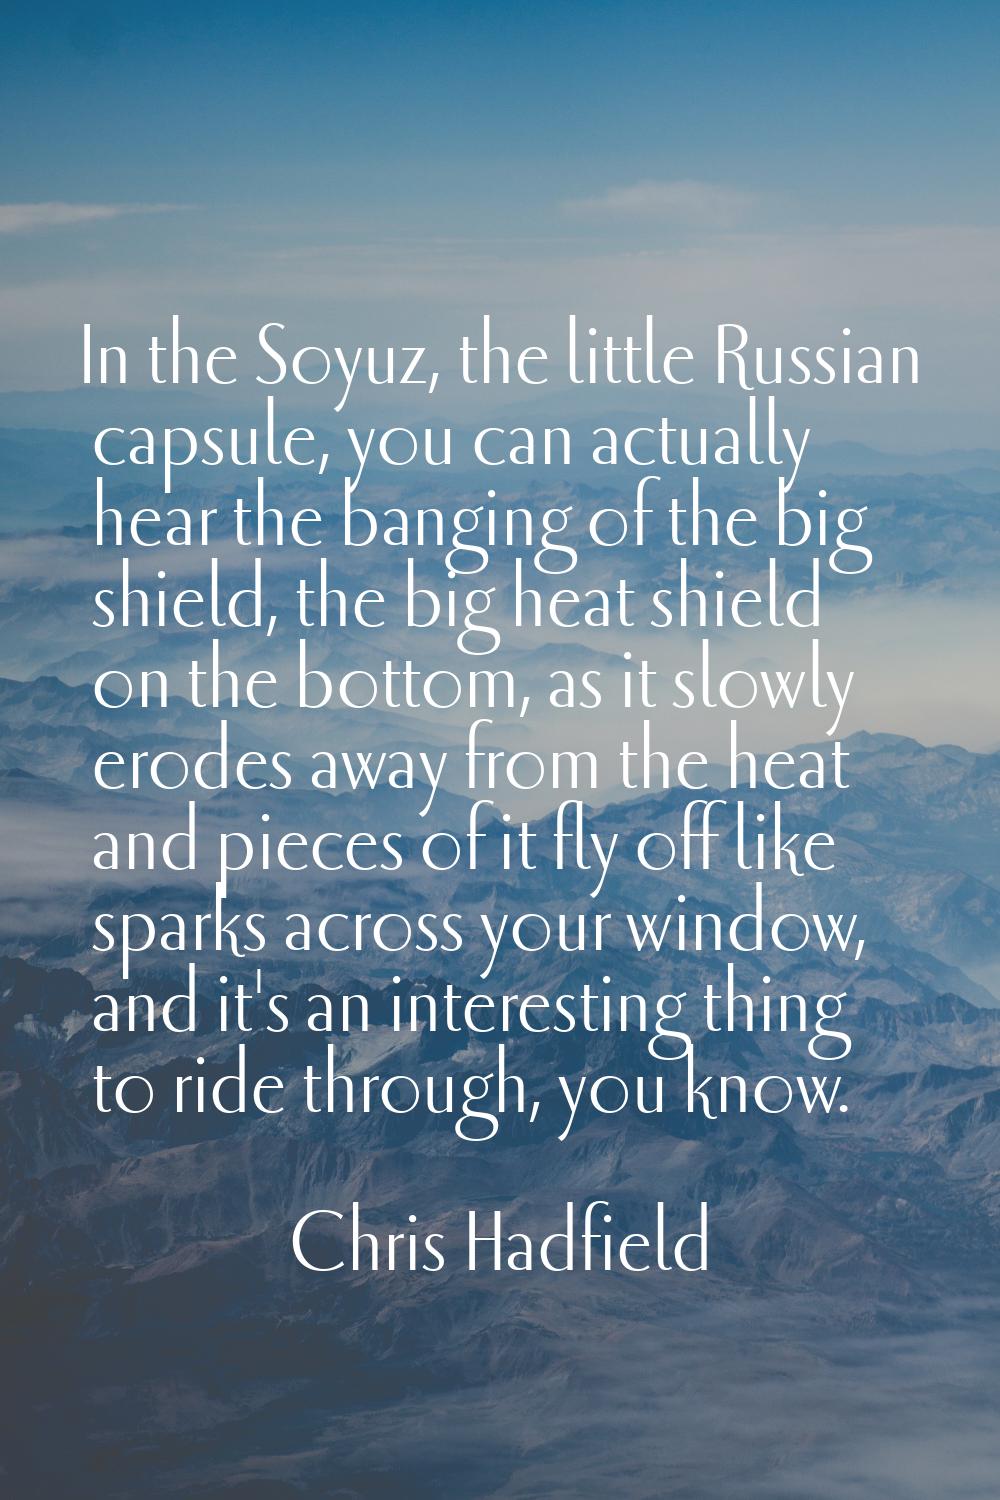 In the Soyuz, the little Russian capsule, you can actually hear the banging of the big shield, the 